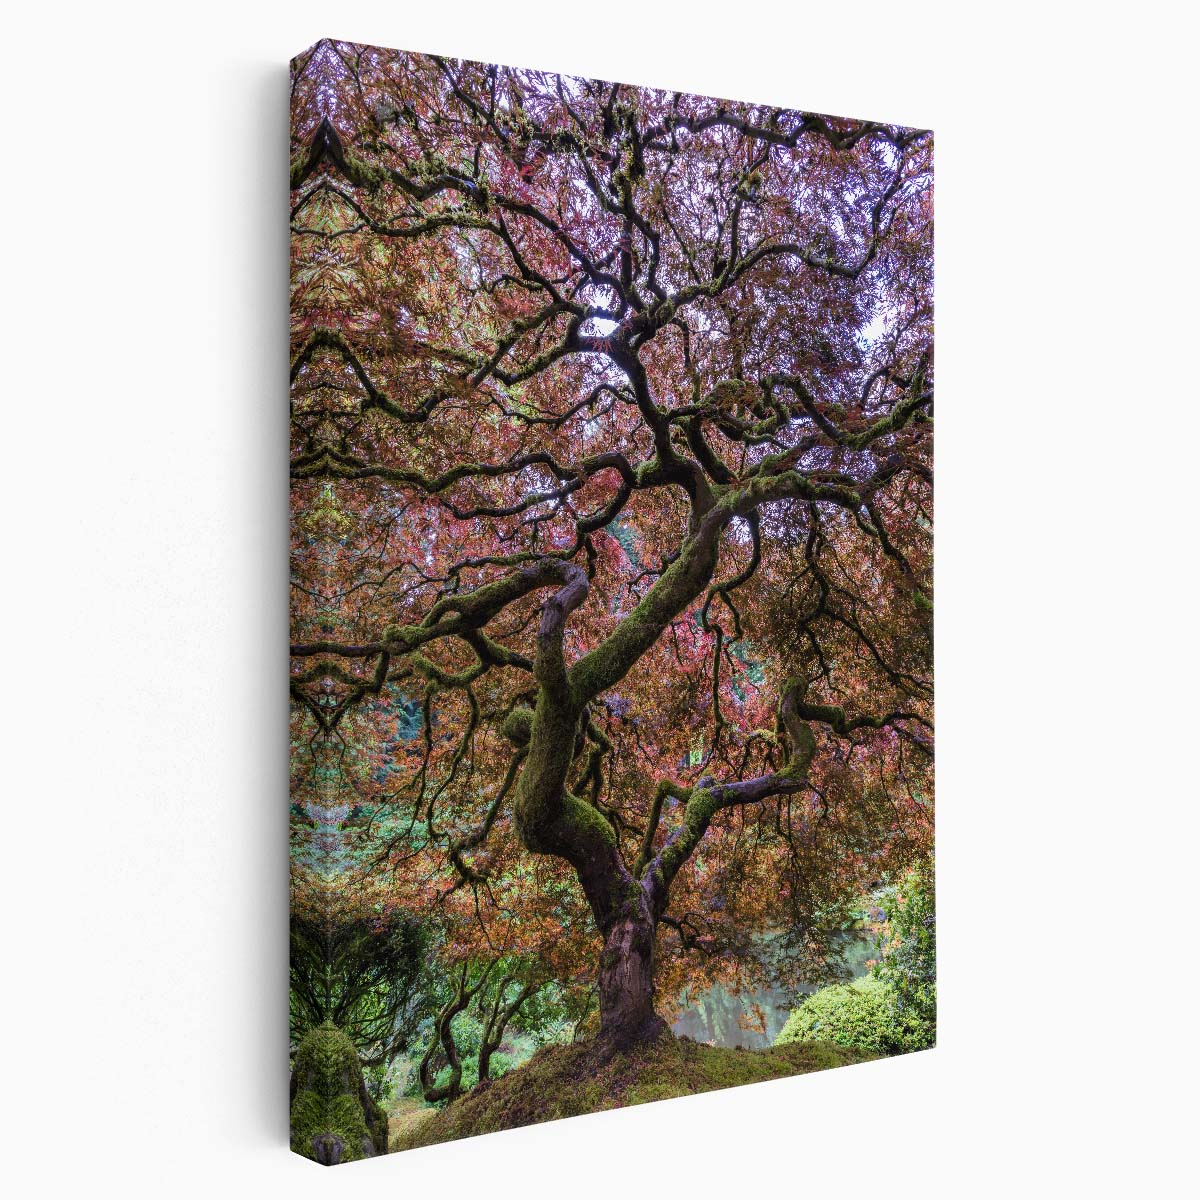 Tranquil Autumn Japanese Maple Tree Landscape Photography Art by Luxuriance Designs, made in USA